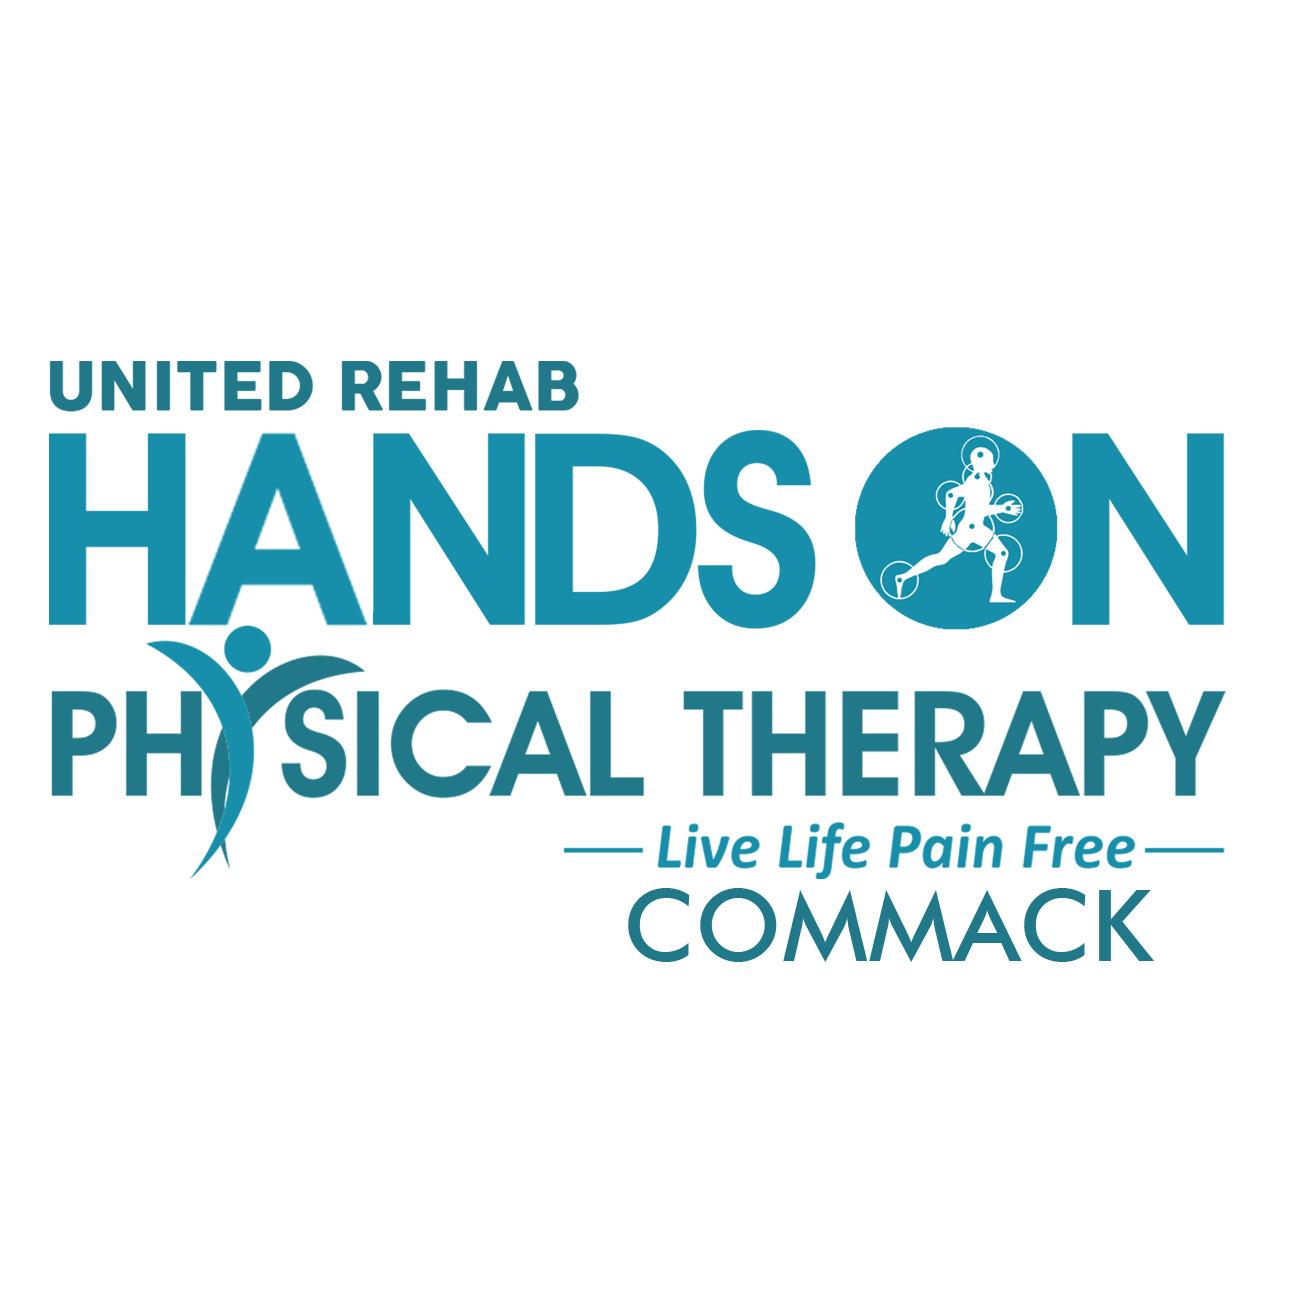 HANDS ON PHYSICAL THERAPY | COMMACK Photo